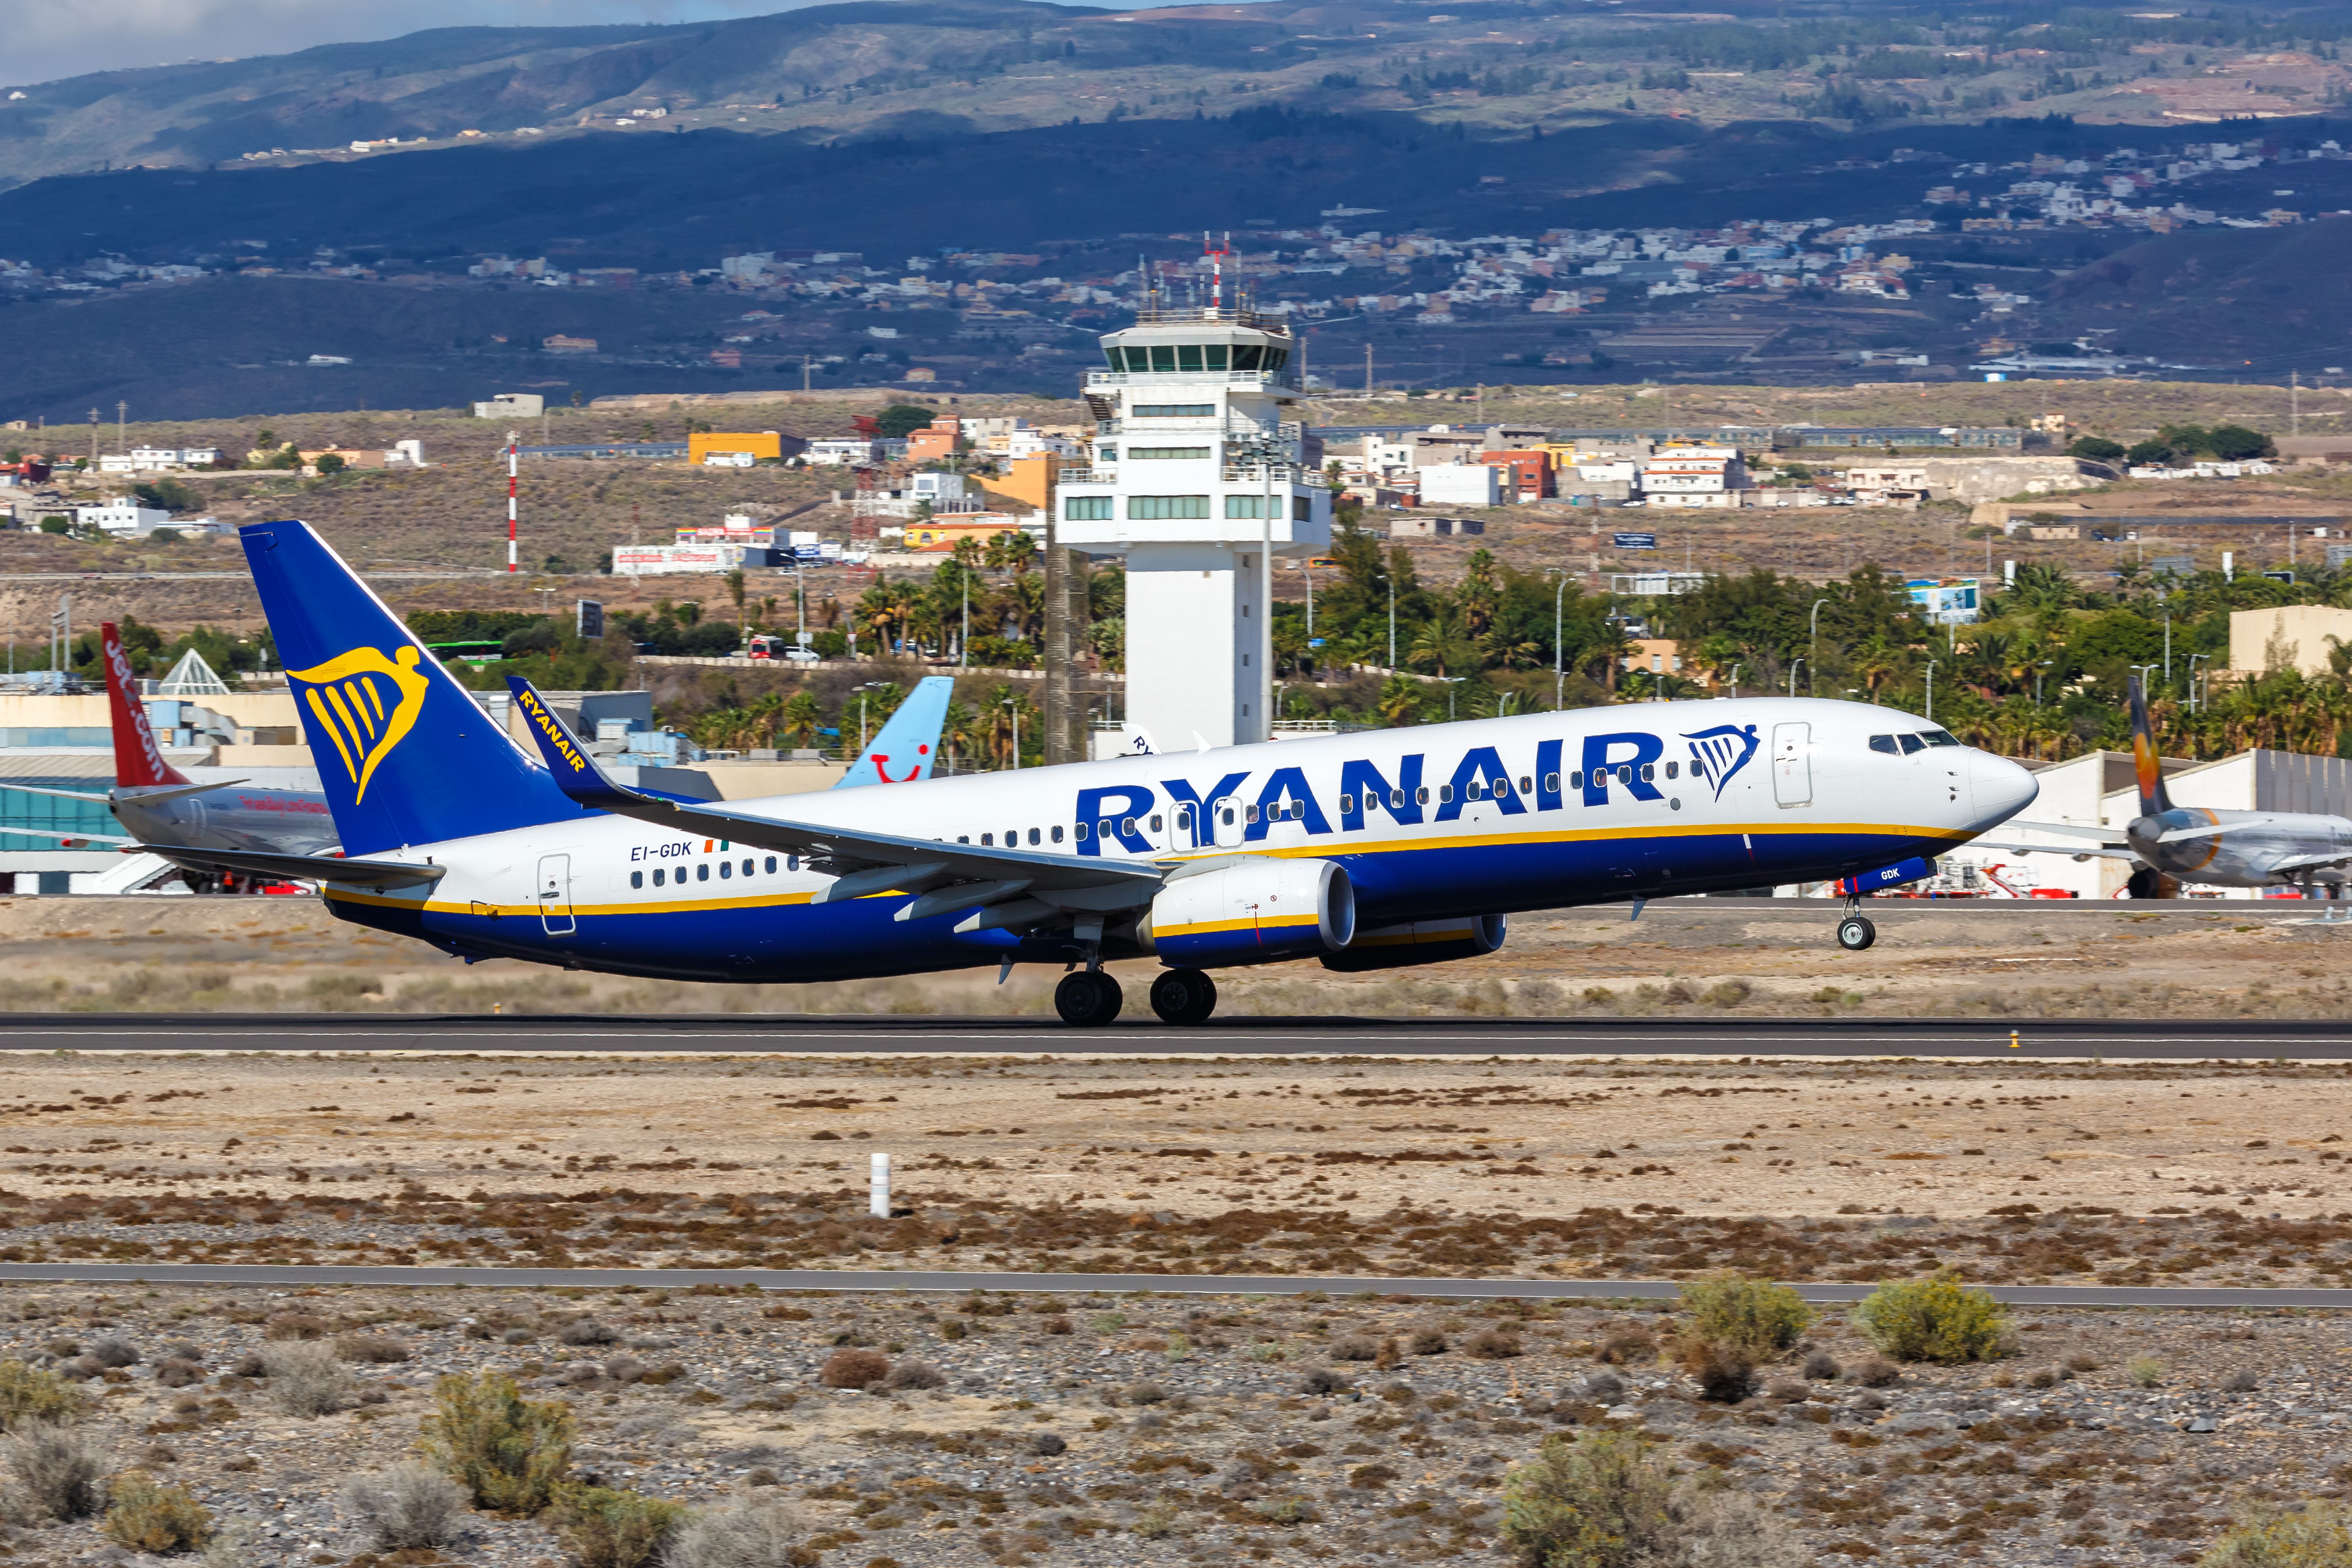 Tenerife South Airport ATC tower with Ryanair Boeing 737